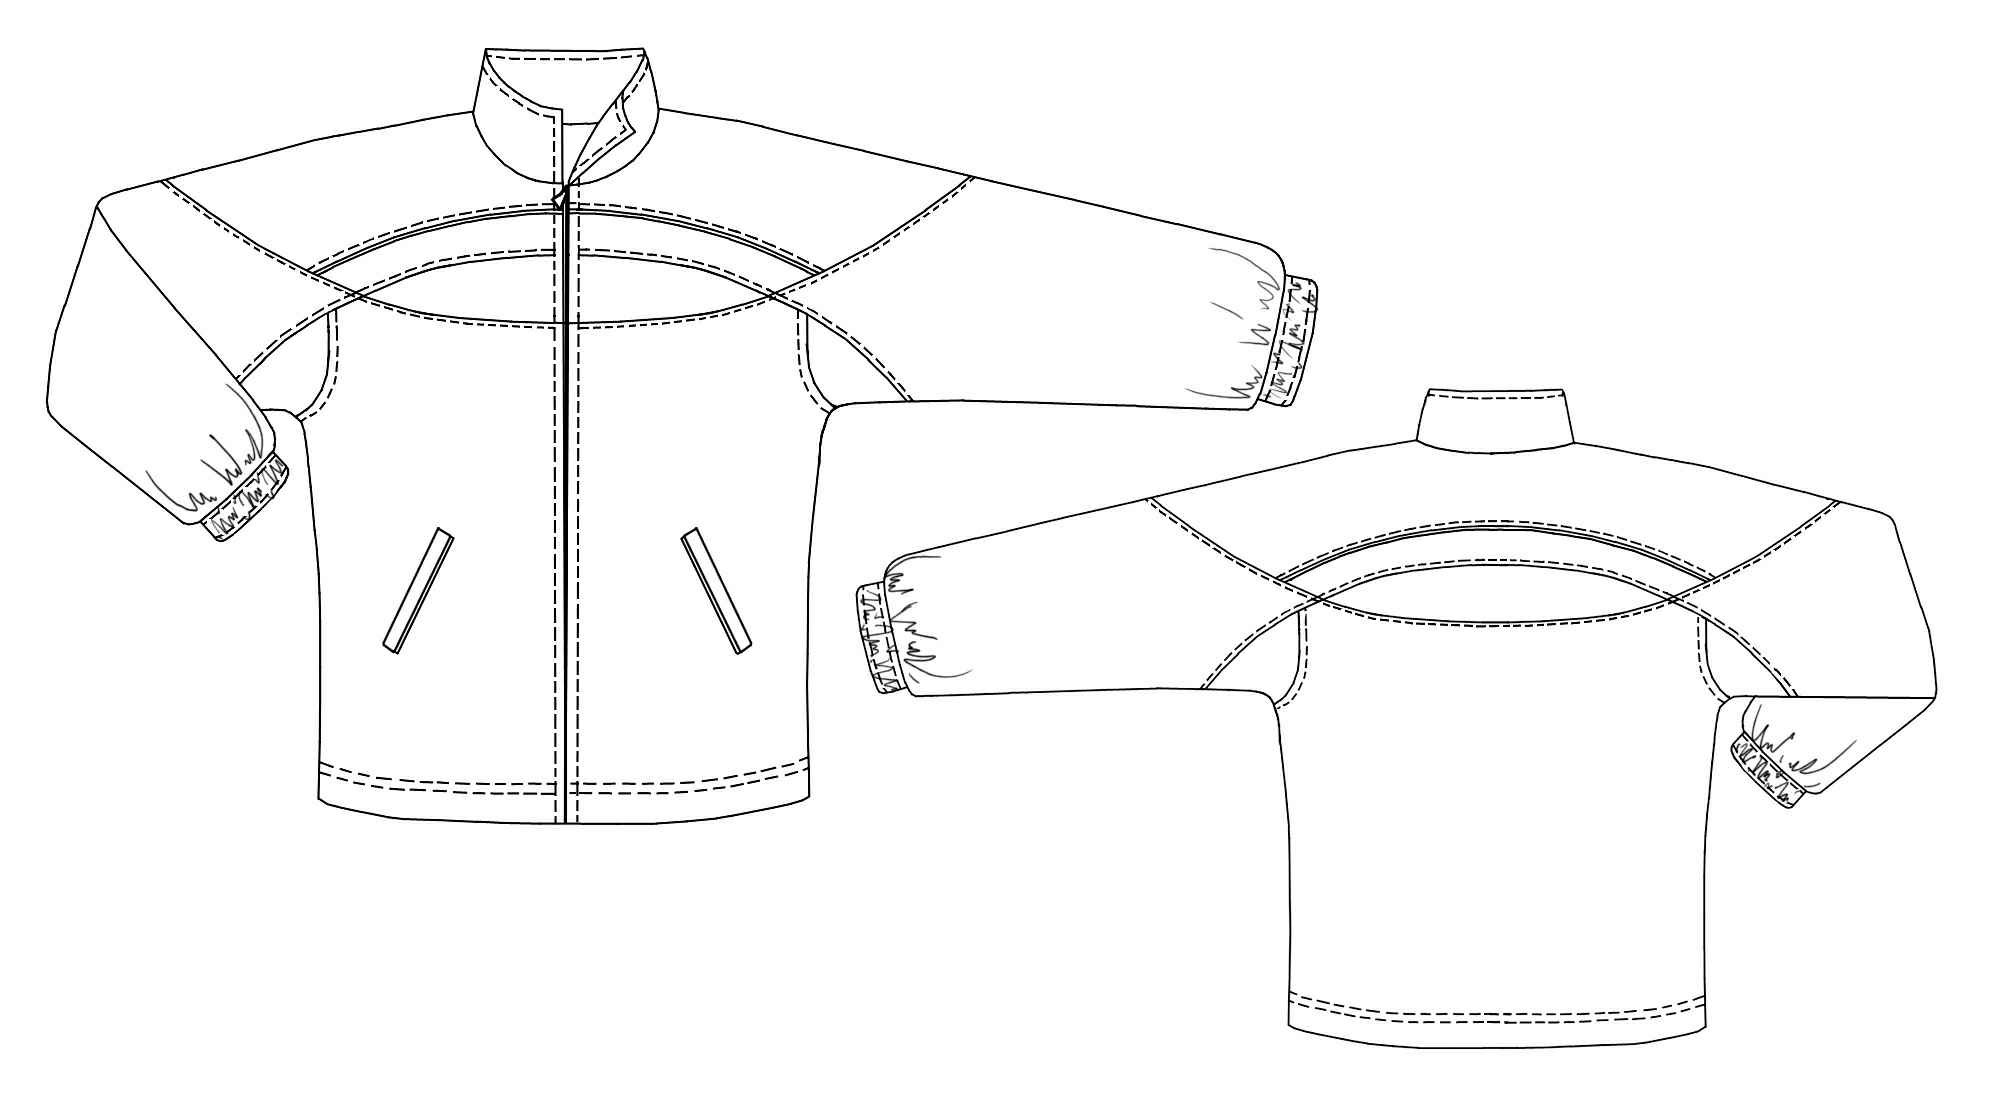 Sport Jacket With Round Yoke - Sewing Pattern #6123. Made-to-measure ...